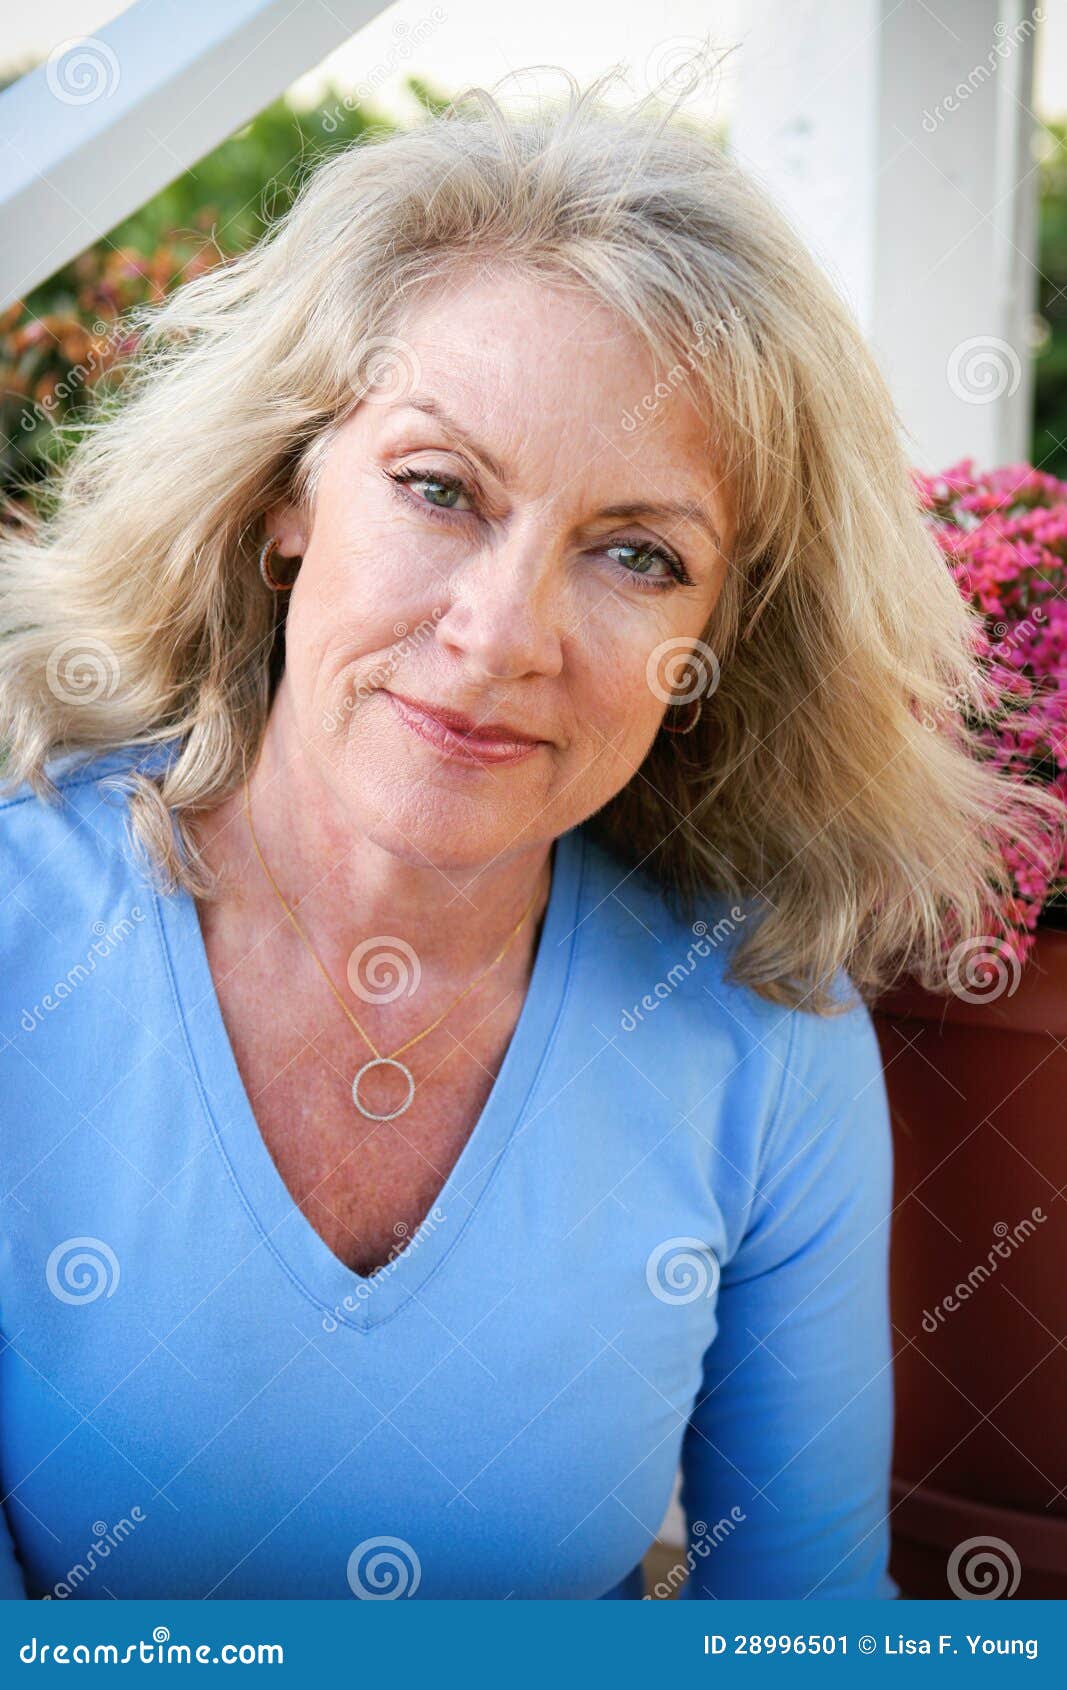 https://thumbs.dreamstime.com/z/beautiful-middle-age-woman-28996501.jpg